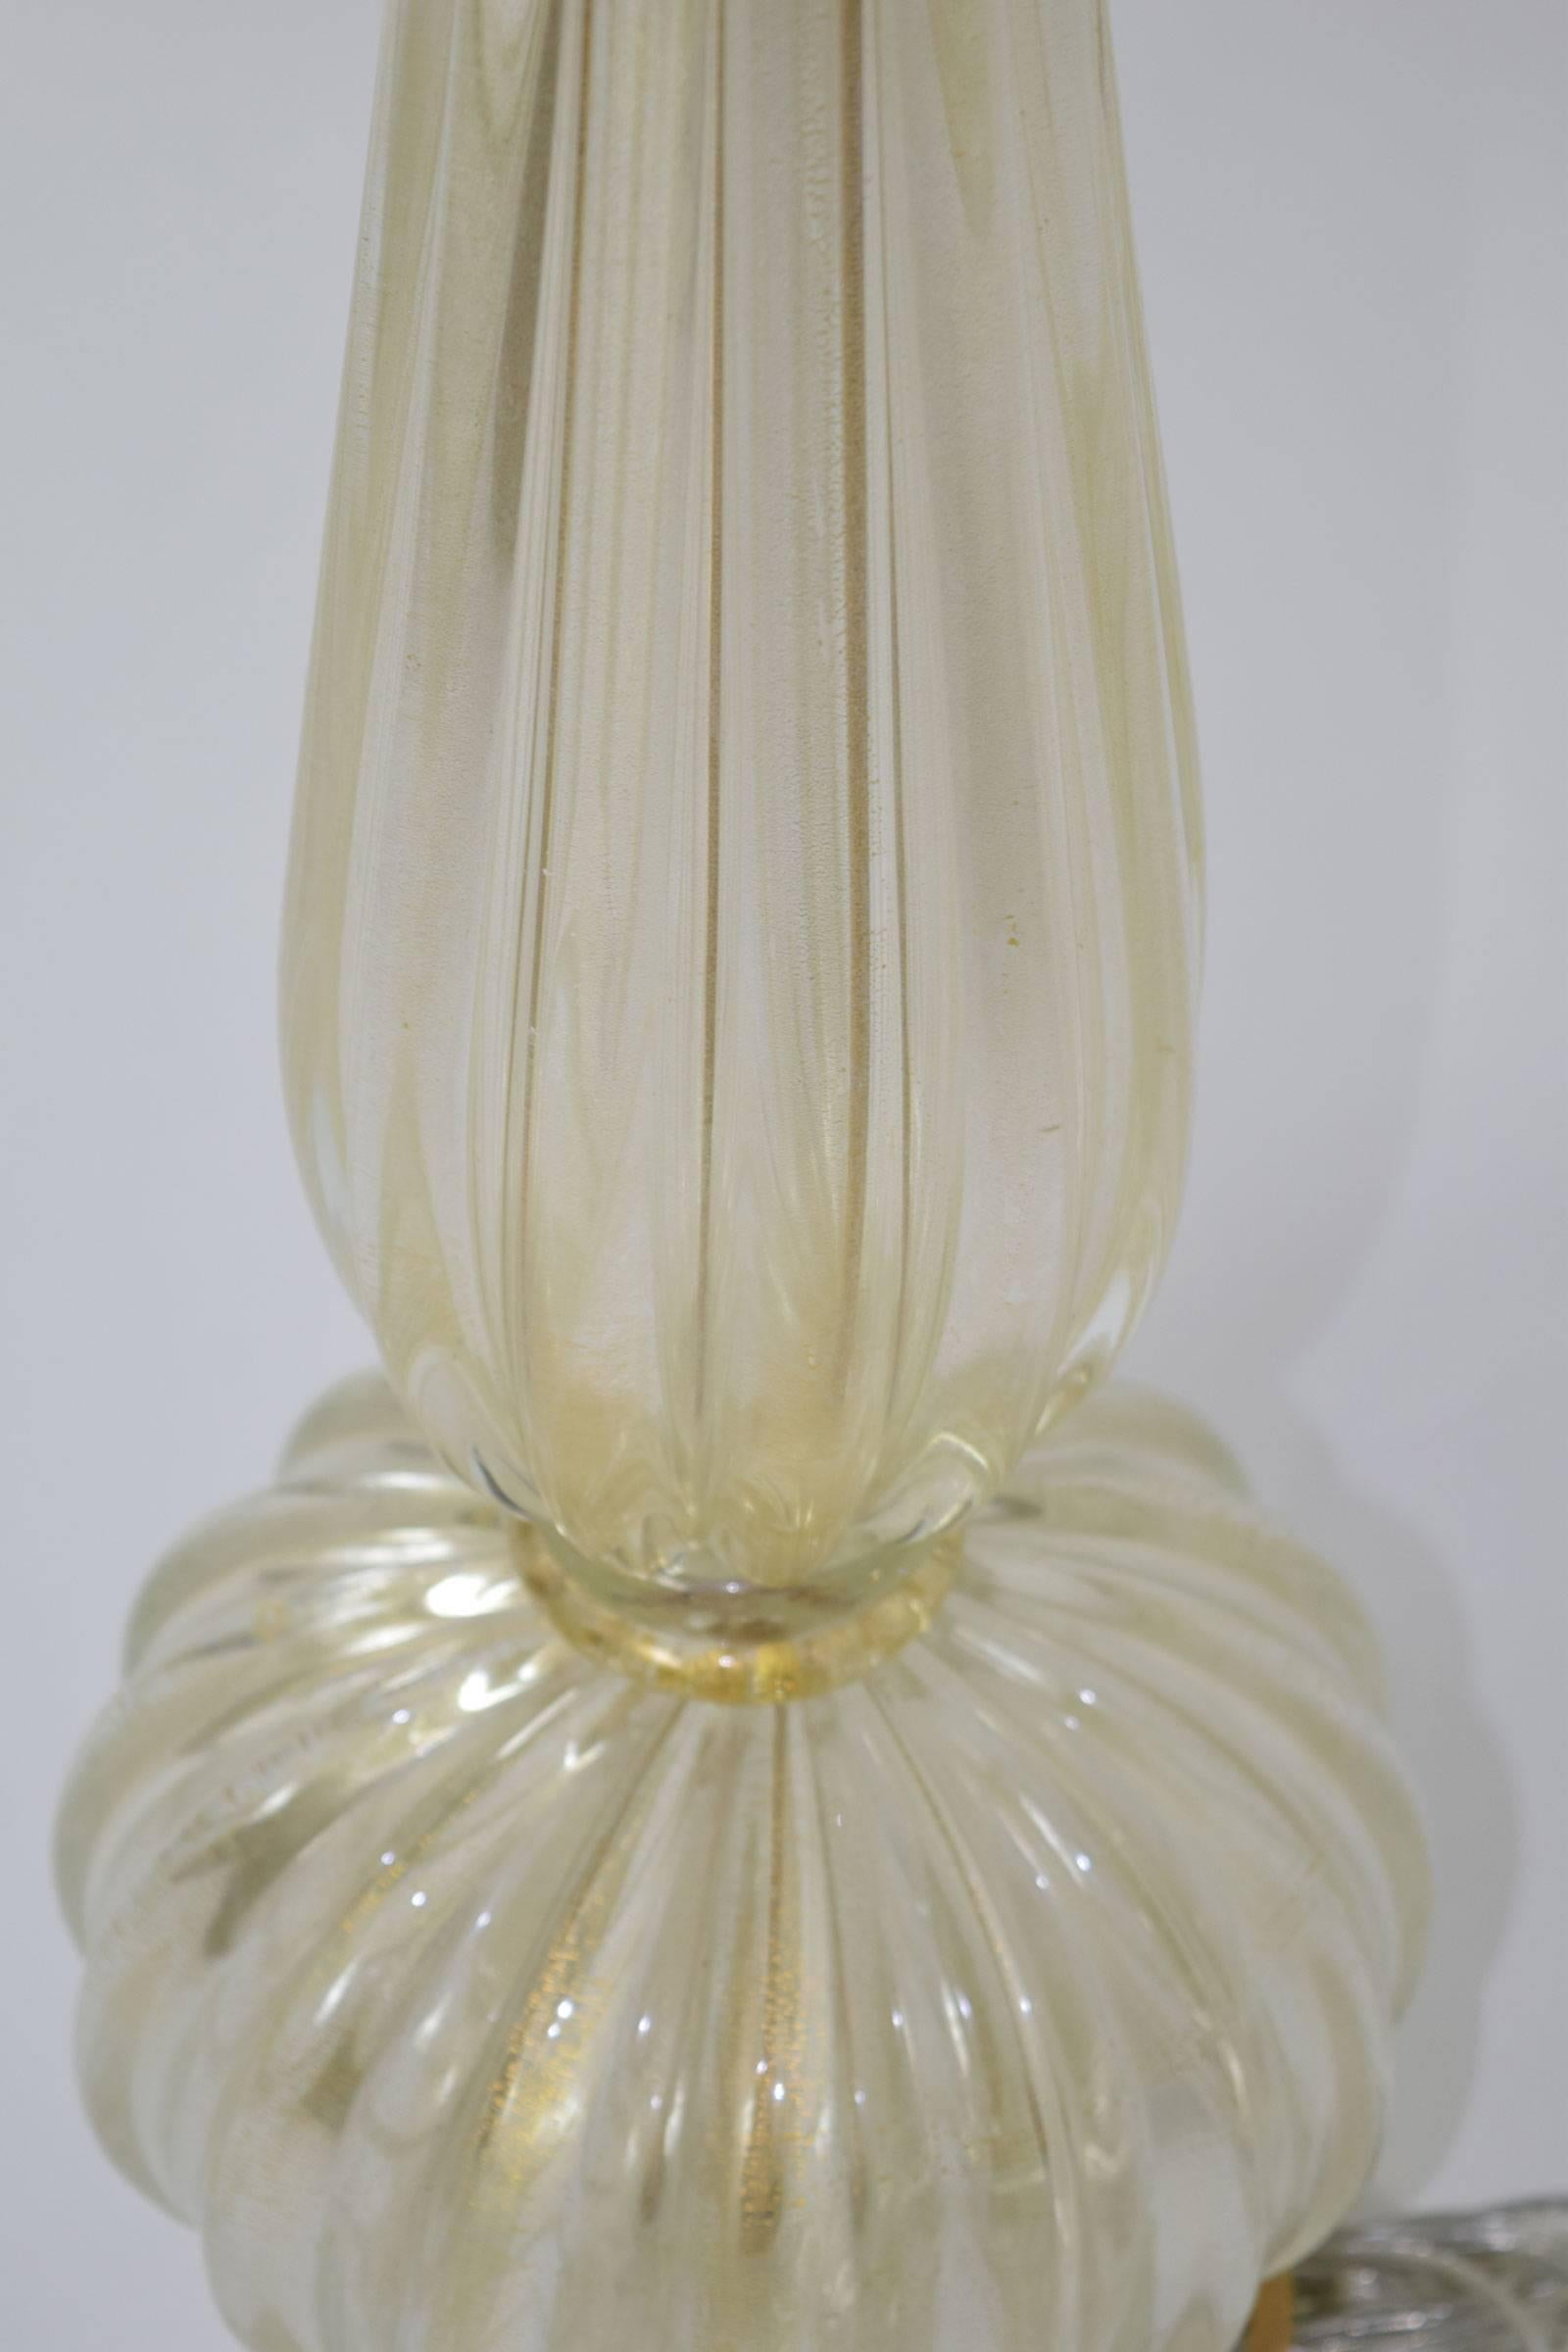 Footed Murano table lamp with gold flecks throughout.